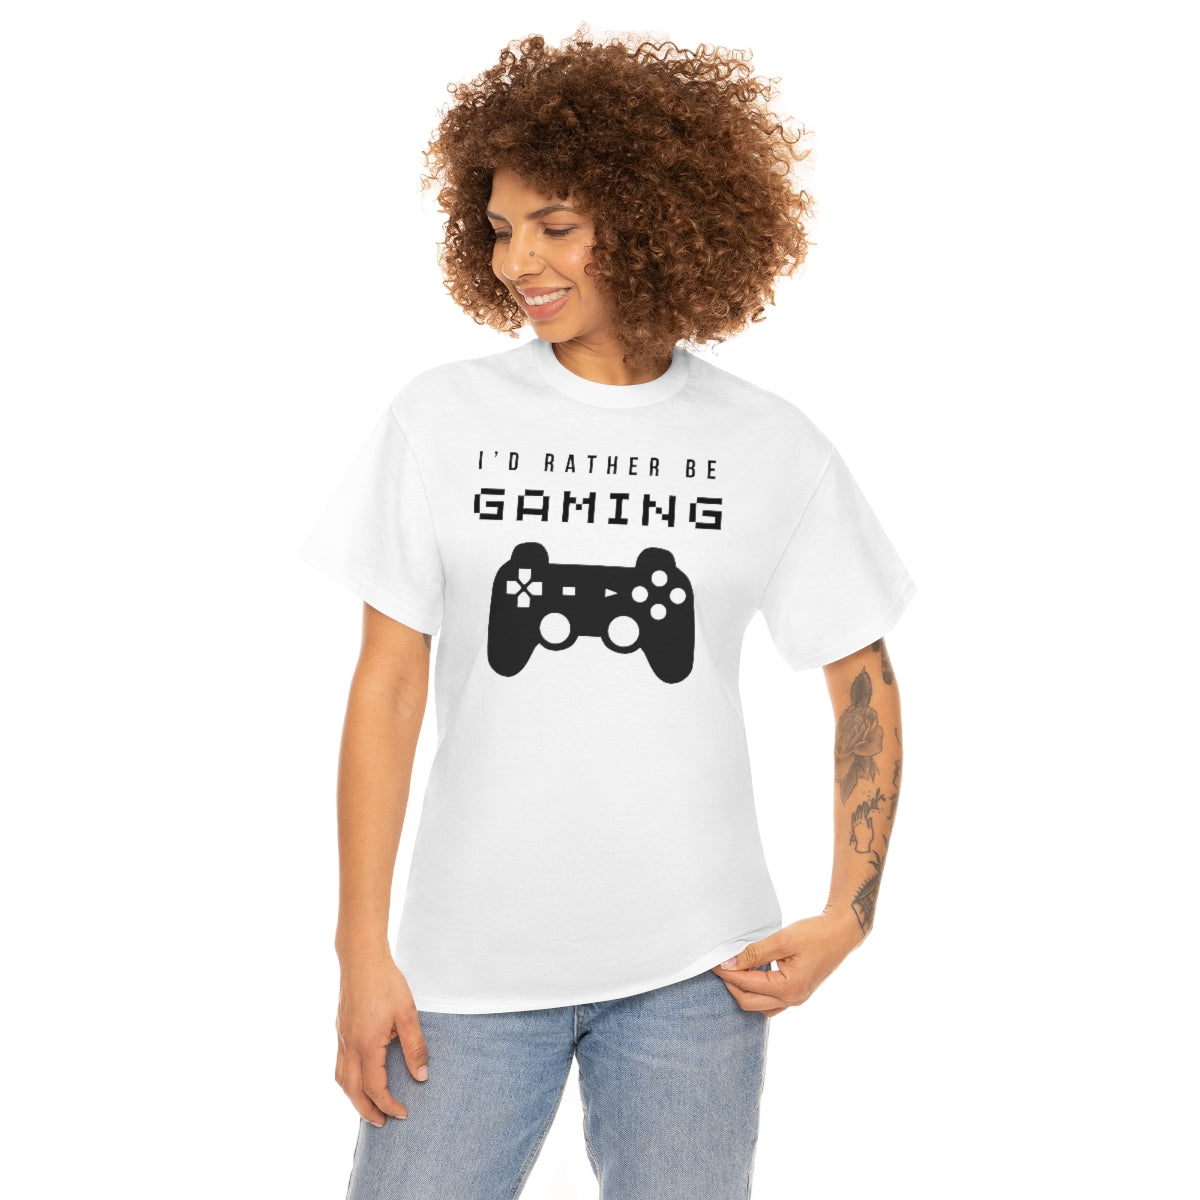 I'd Rather Be Gaming Tee